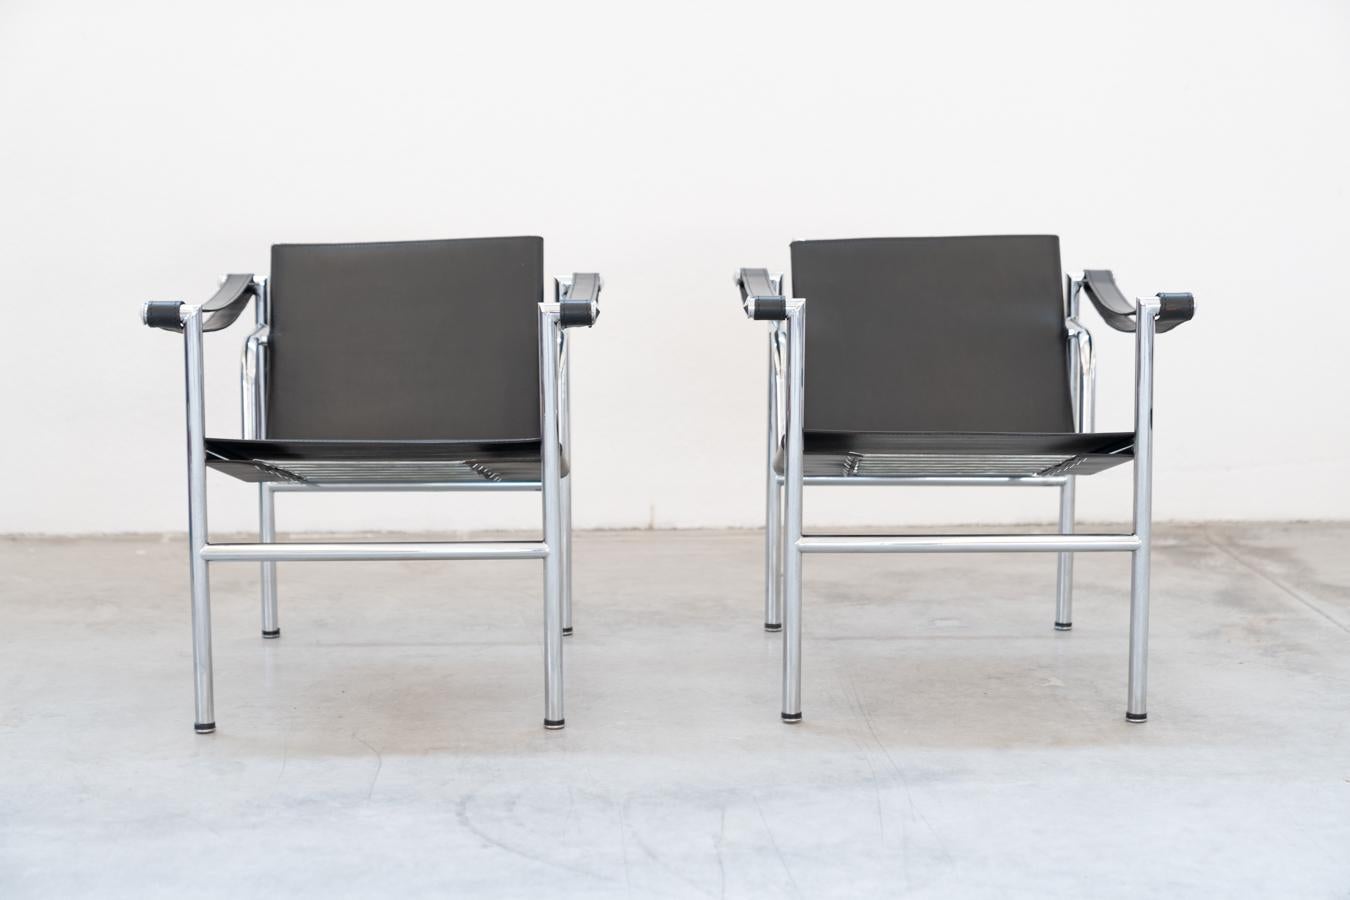 Pair of LC1 armchairs by Le Corbusier, for Cassina 1970
A piece of design history from Le Corbusier's LC1. The design 			dates back to 1928. Simple armchairs, in their Avantgard design of the 			1920s, during the period when the designer Le